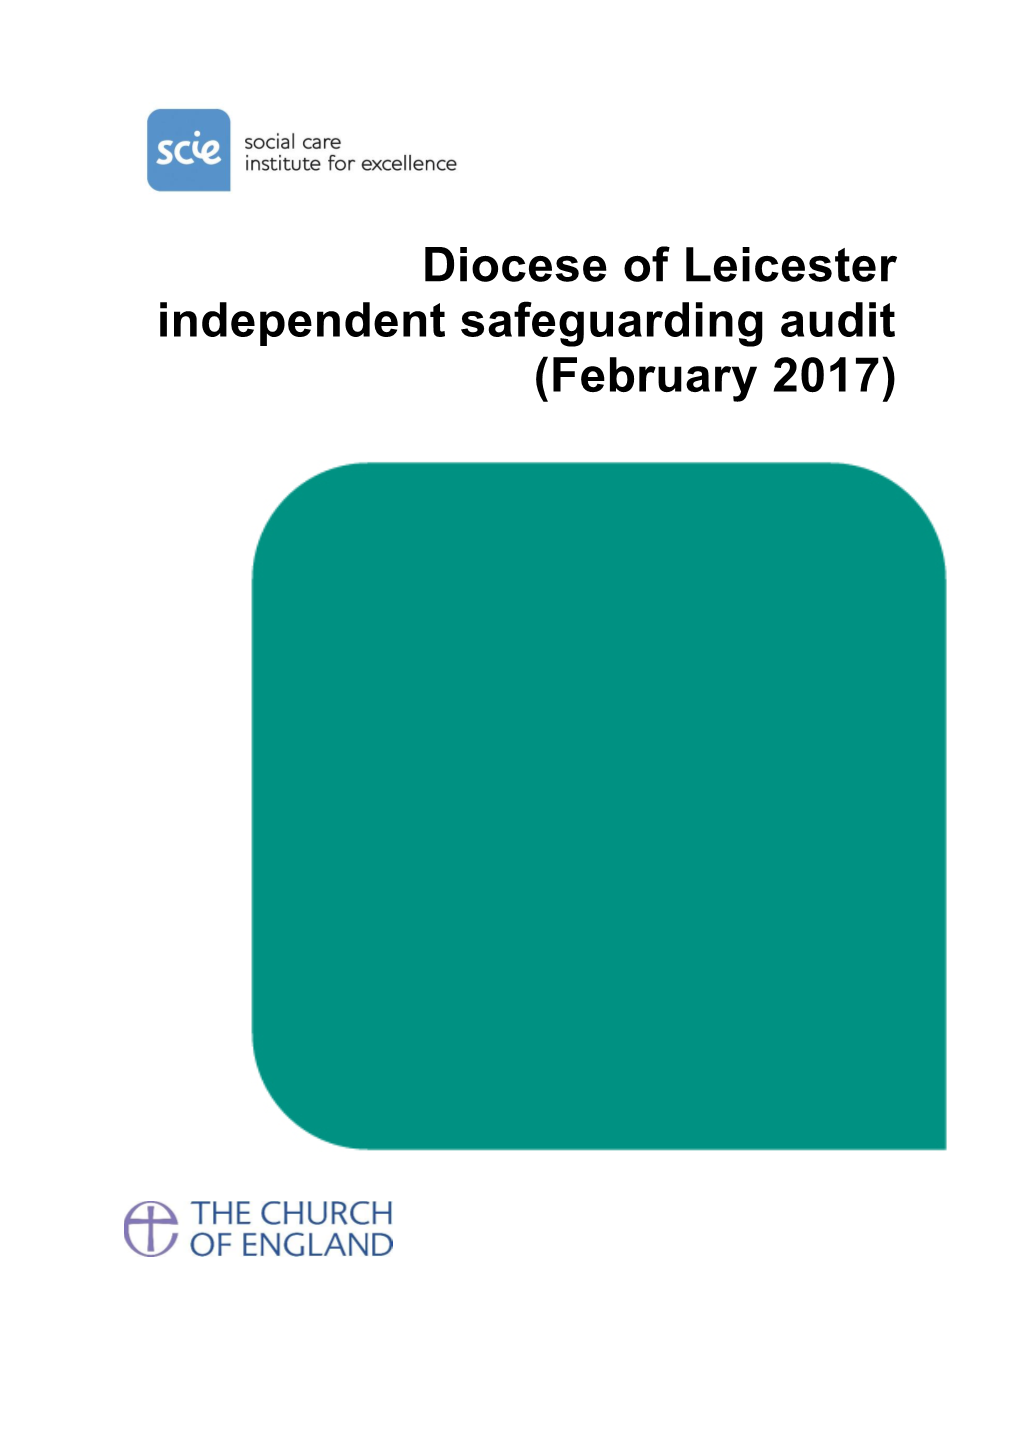 Diocese of Leicester Independent Safeguarding Audit (February 2017)